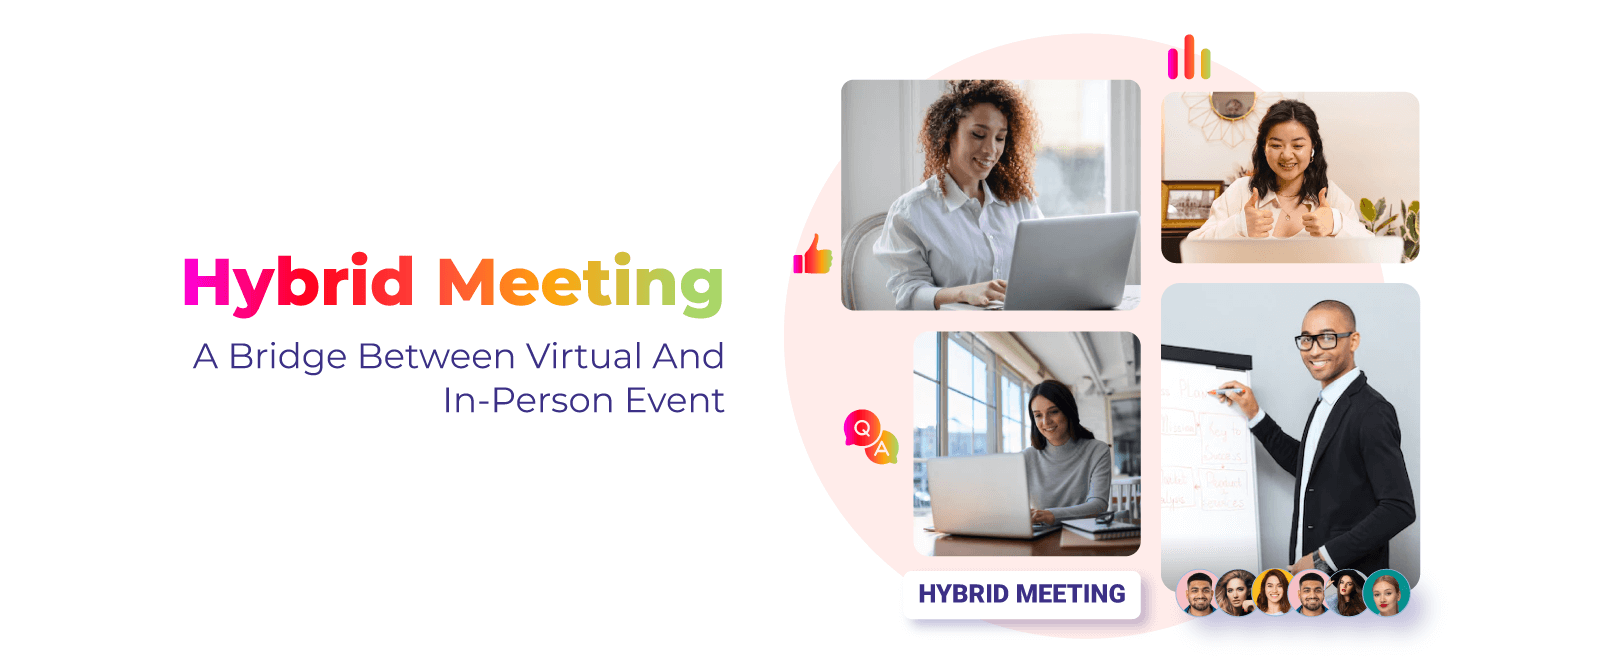 Hybrid Meeting: A Bridge Between Virtual and In-Person Event